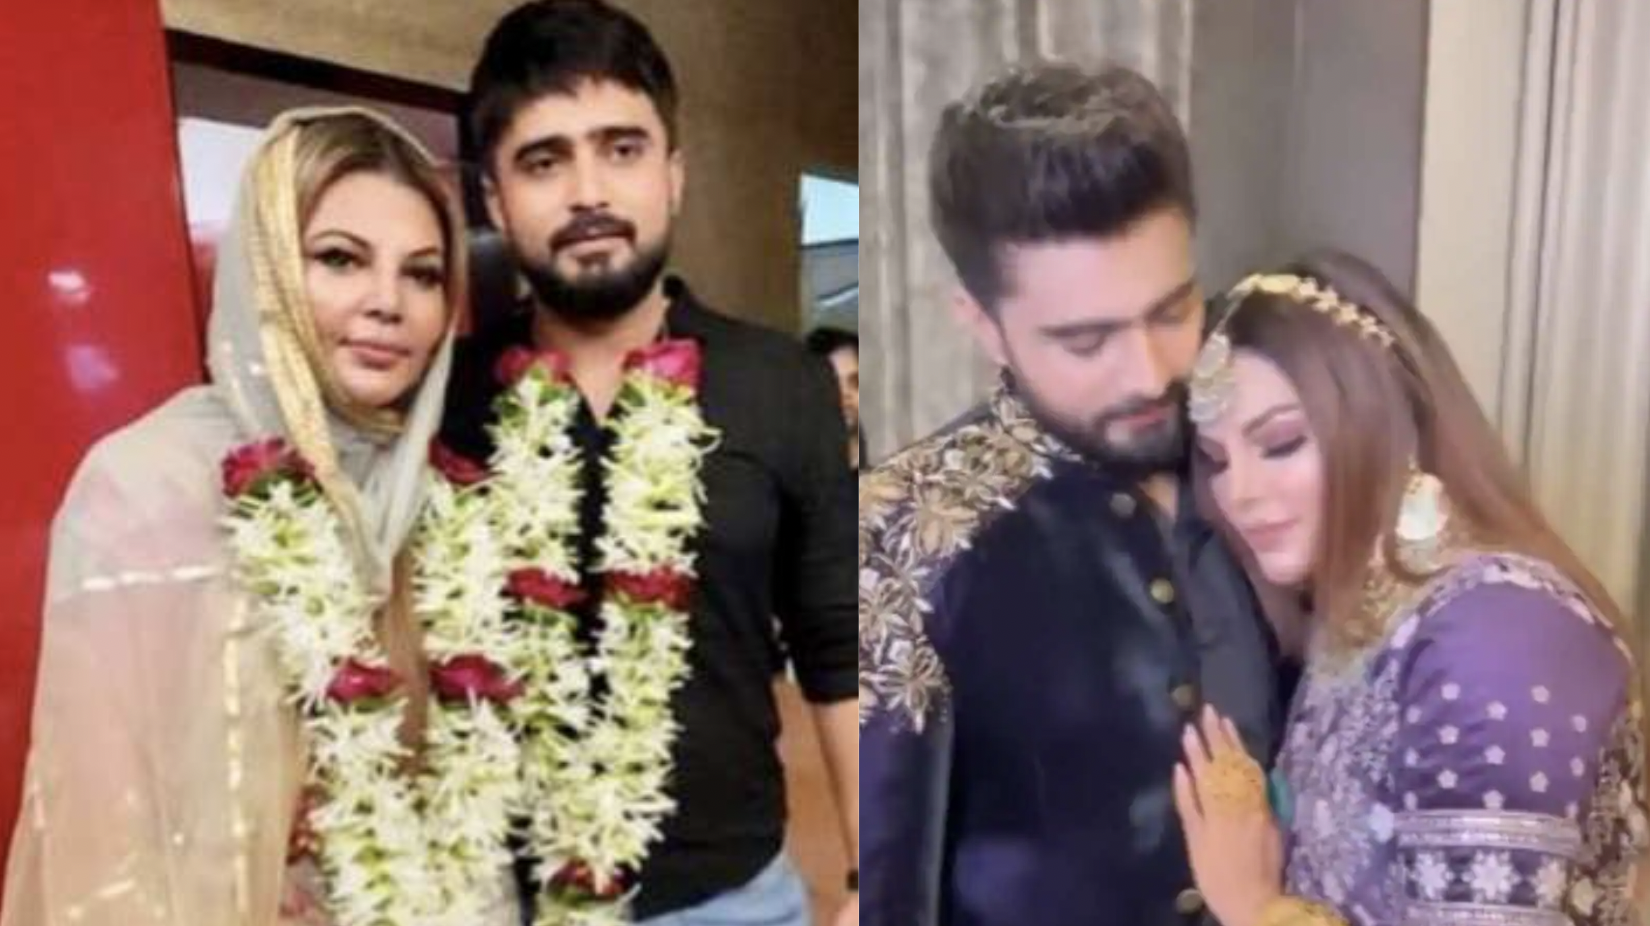 adil finally agree for marriage with rakhi